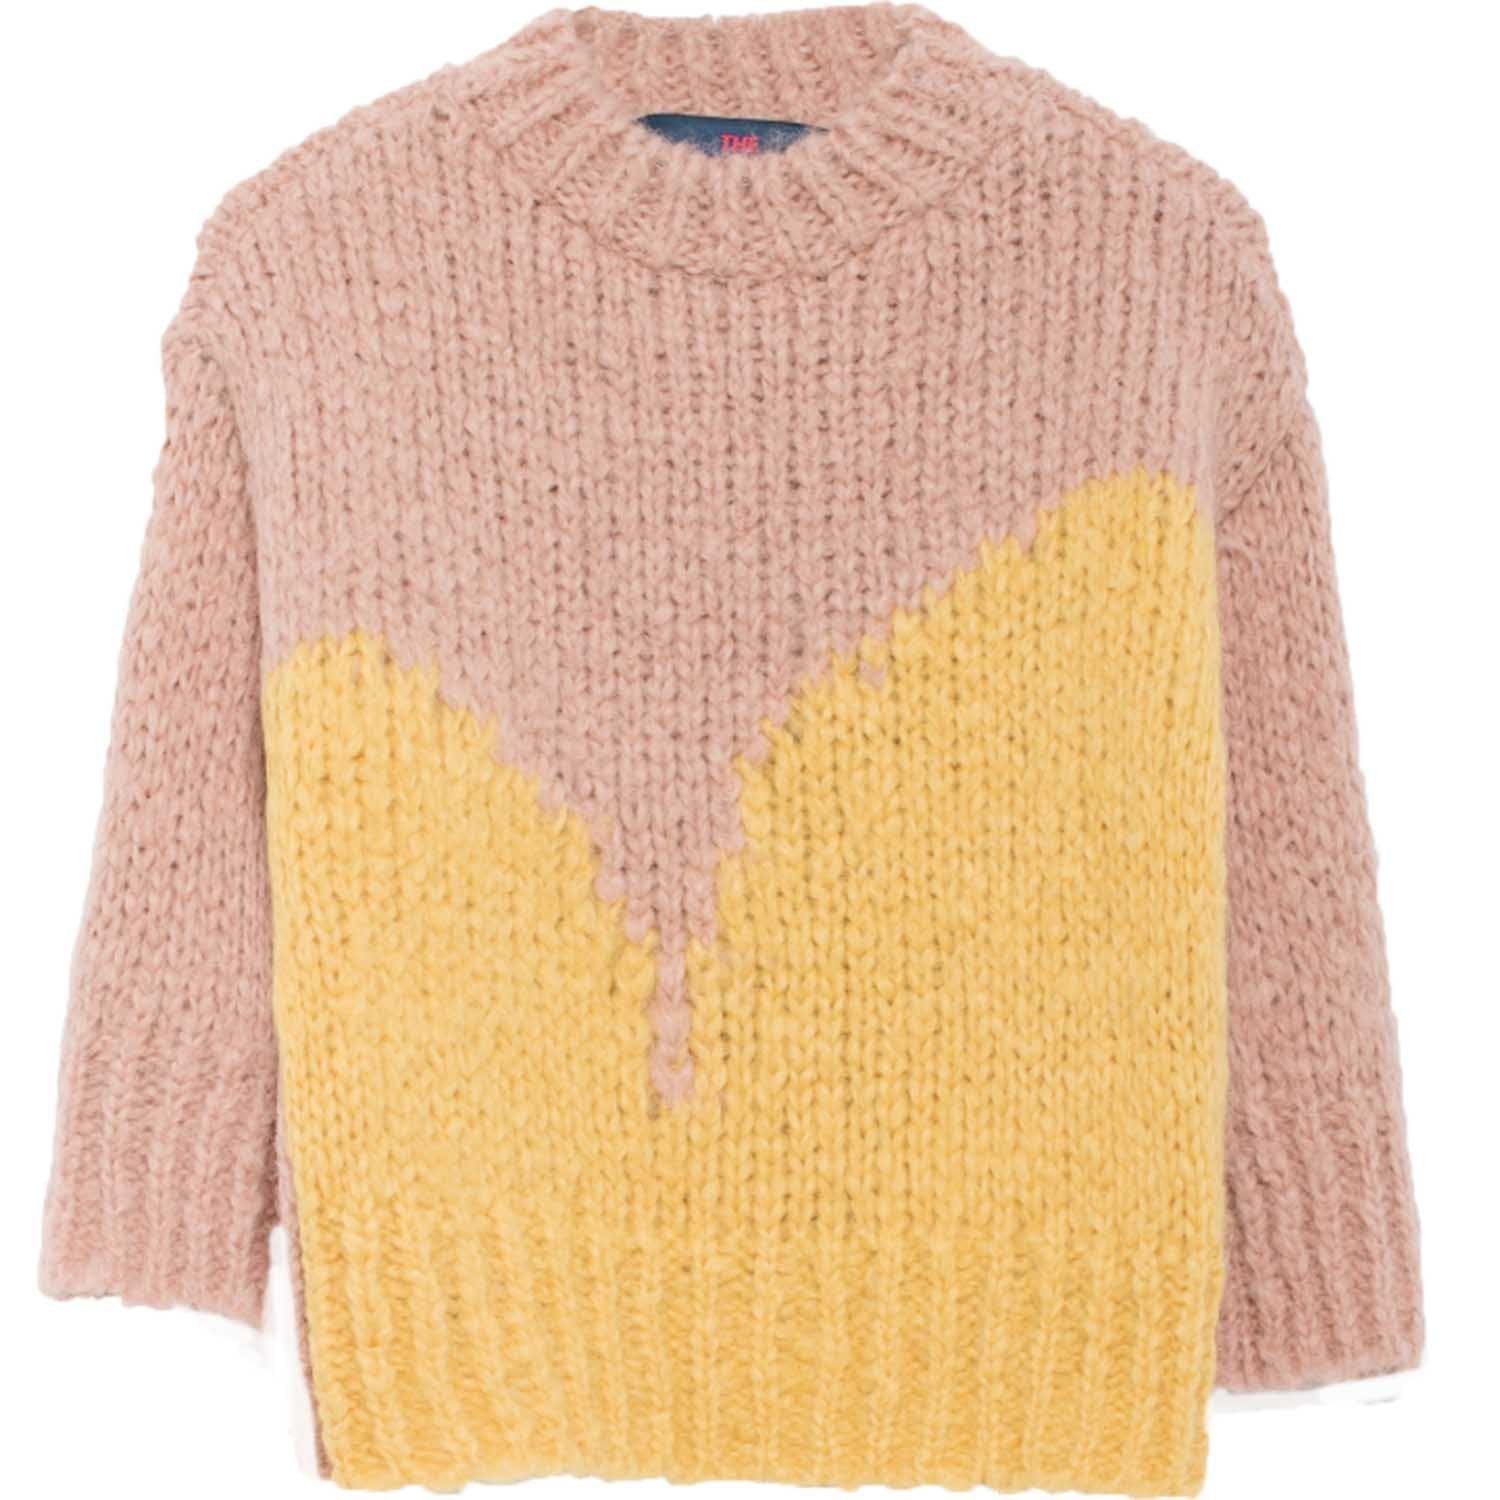 Pullover Bull Yellow-Fille-THE ANIMALS OBSERVATORY-Maralex Paris (1975781982271)